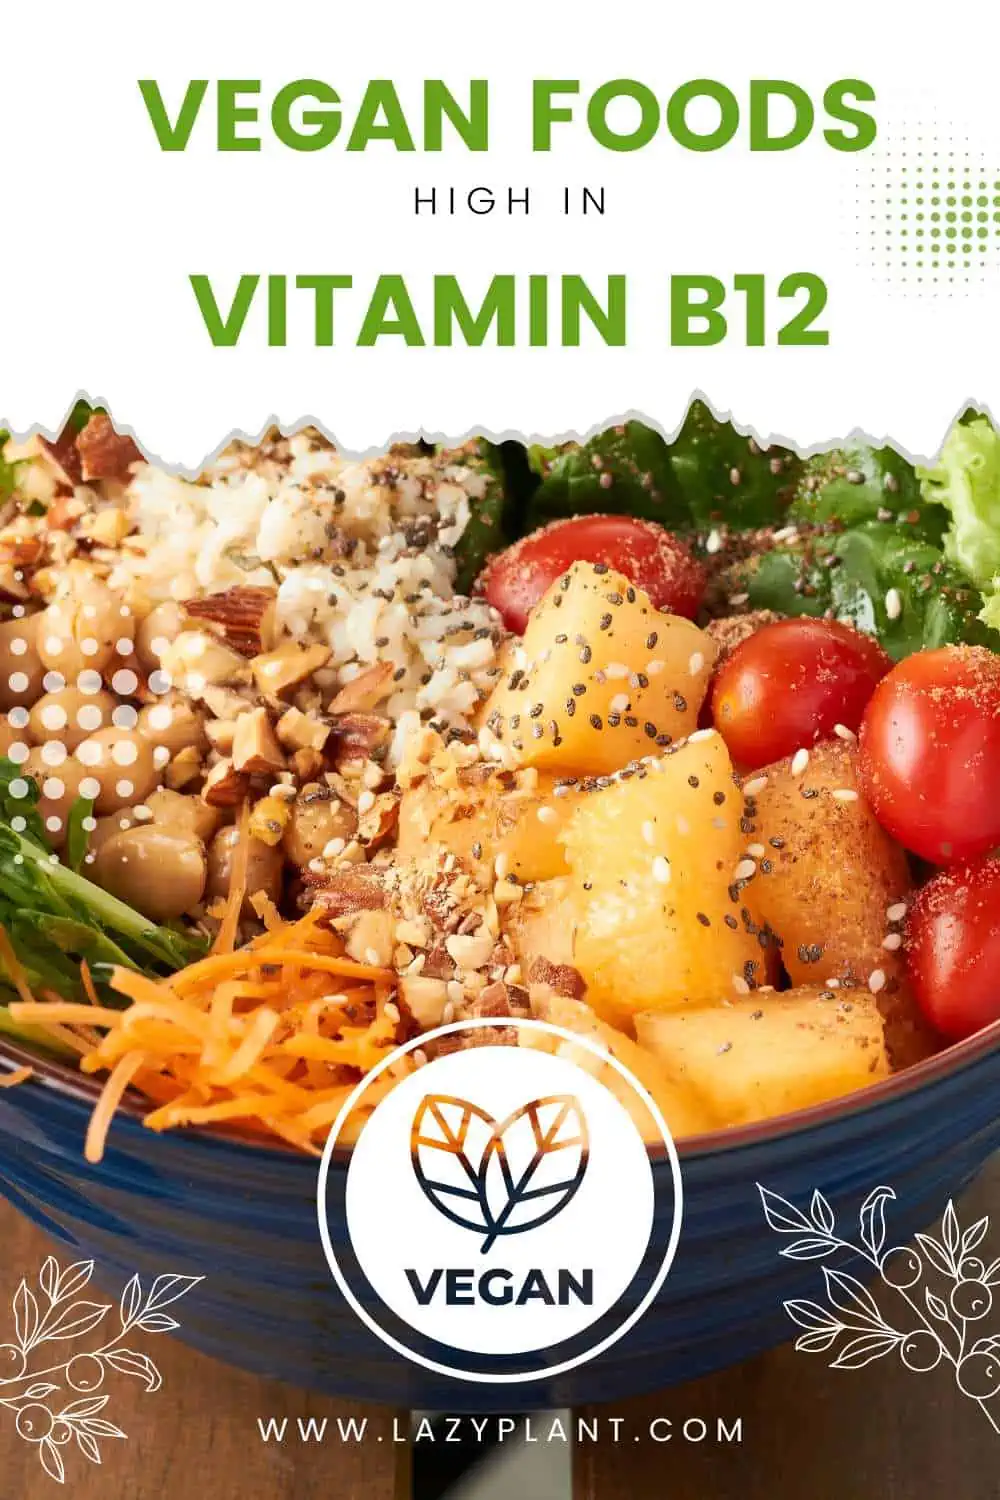 A list of common vegan foods with vitamin B12.